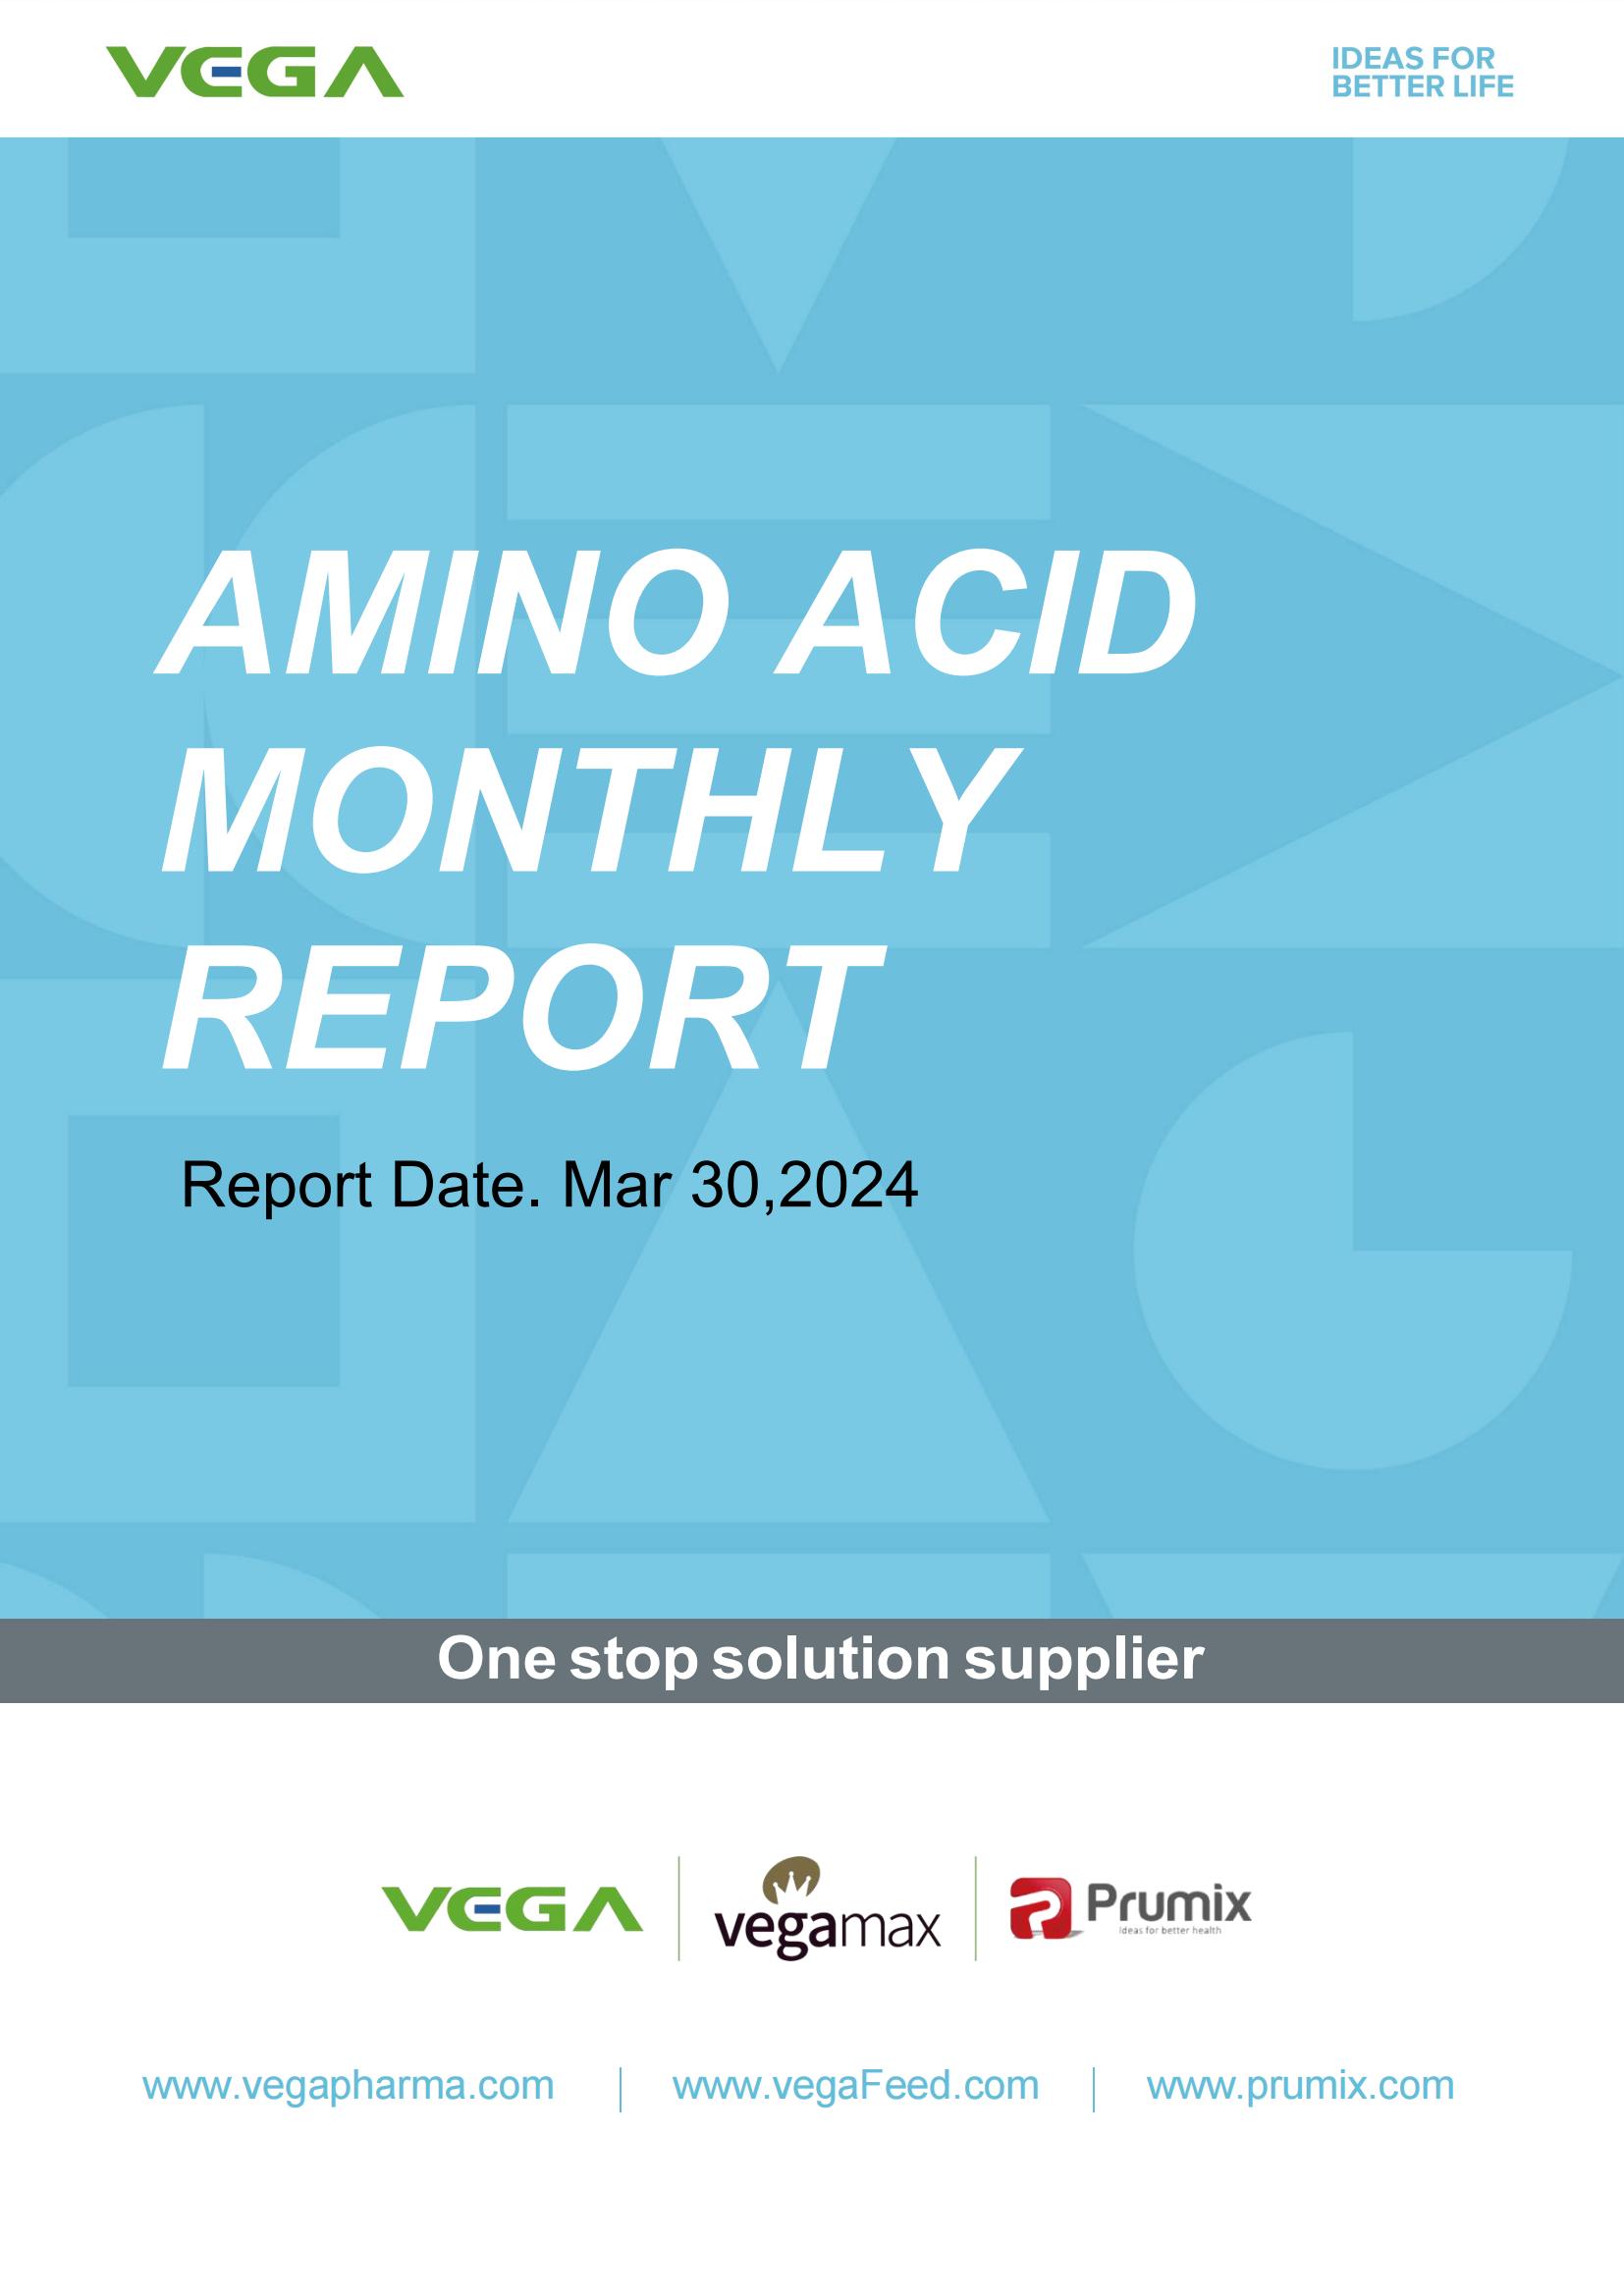 Amino Acid monthly report of March 2024 Vega group.jpg